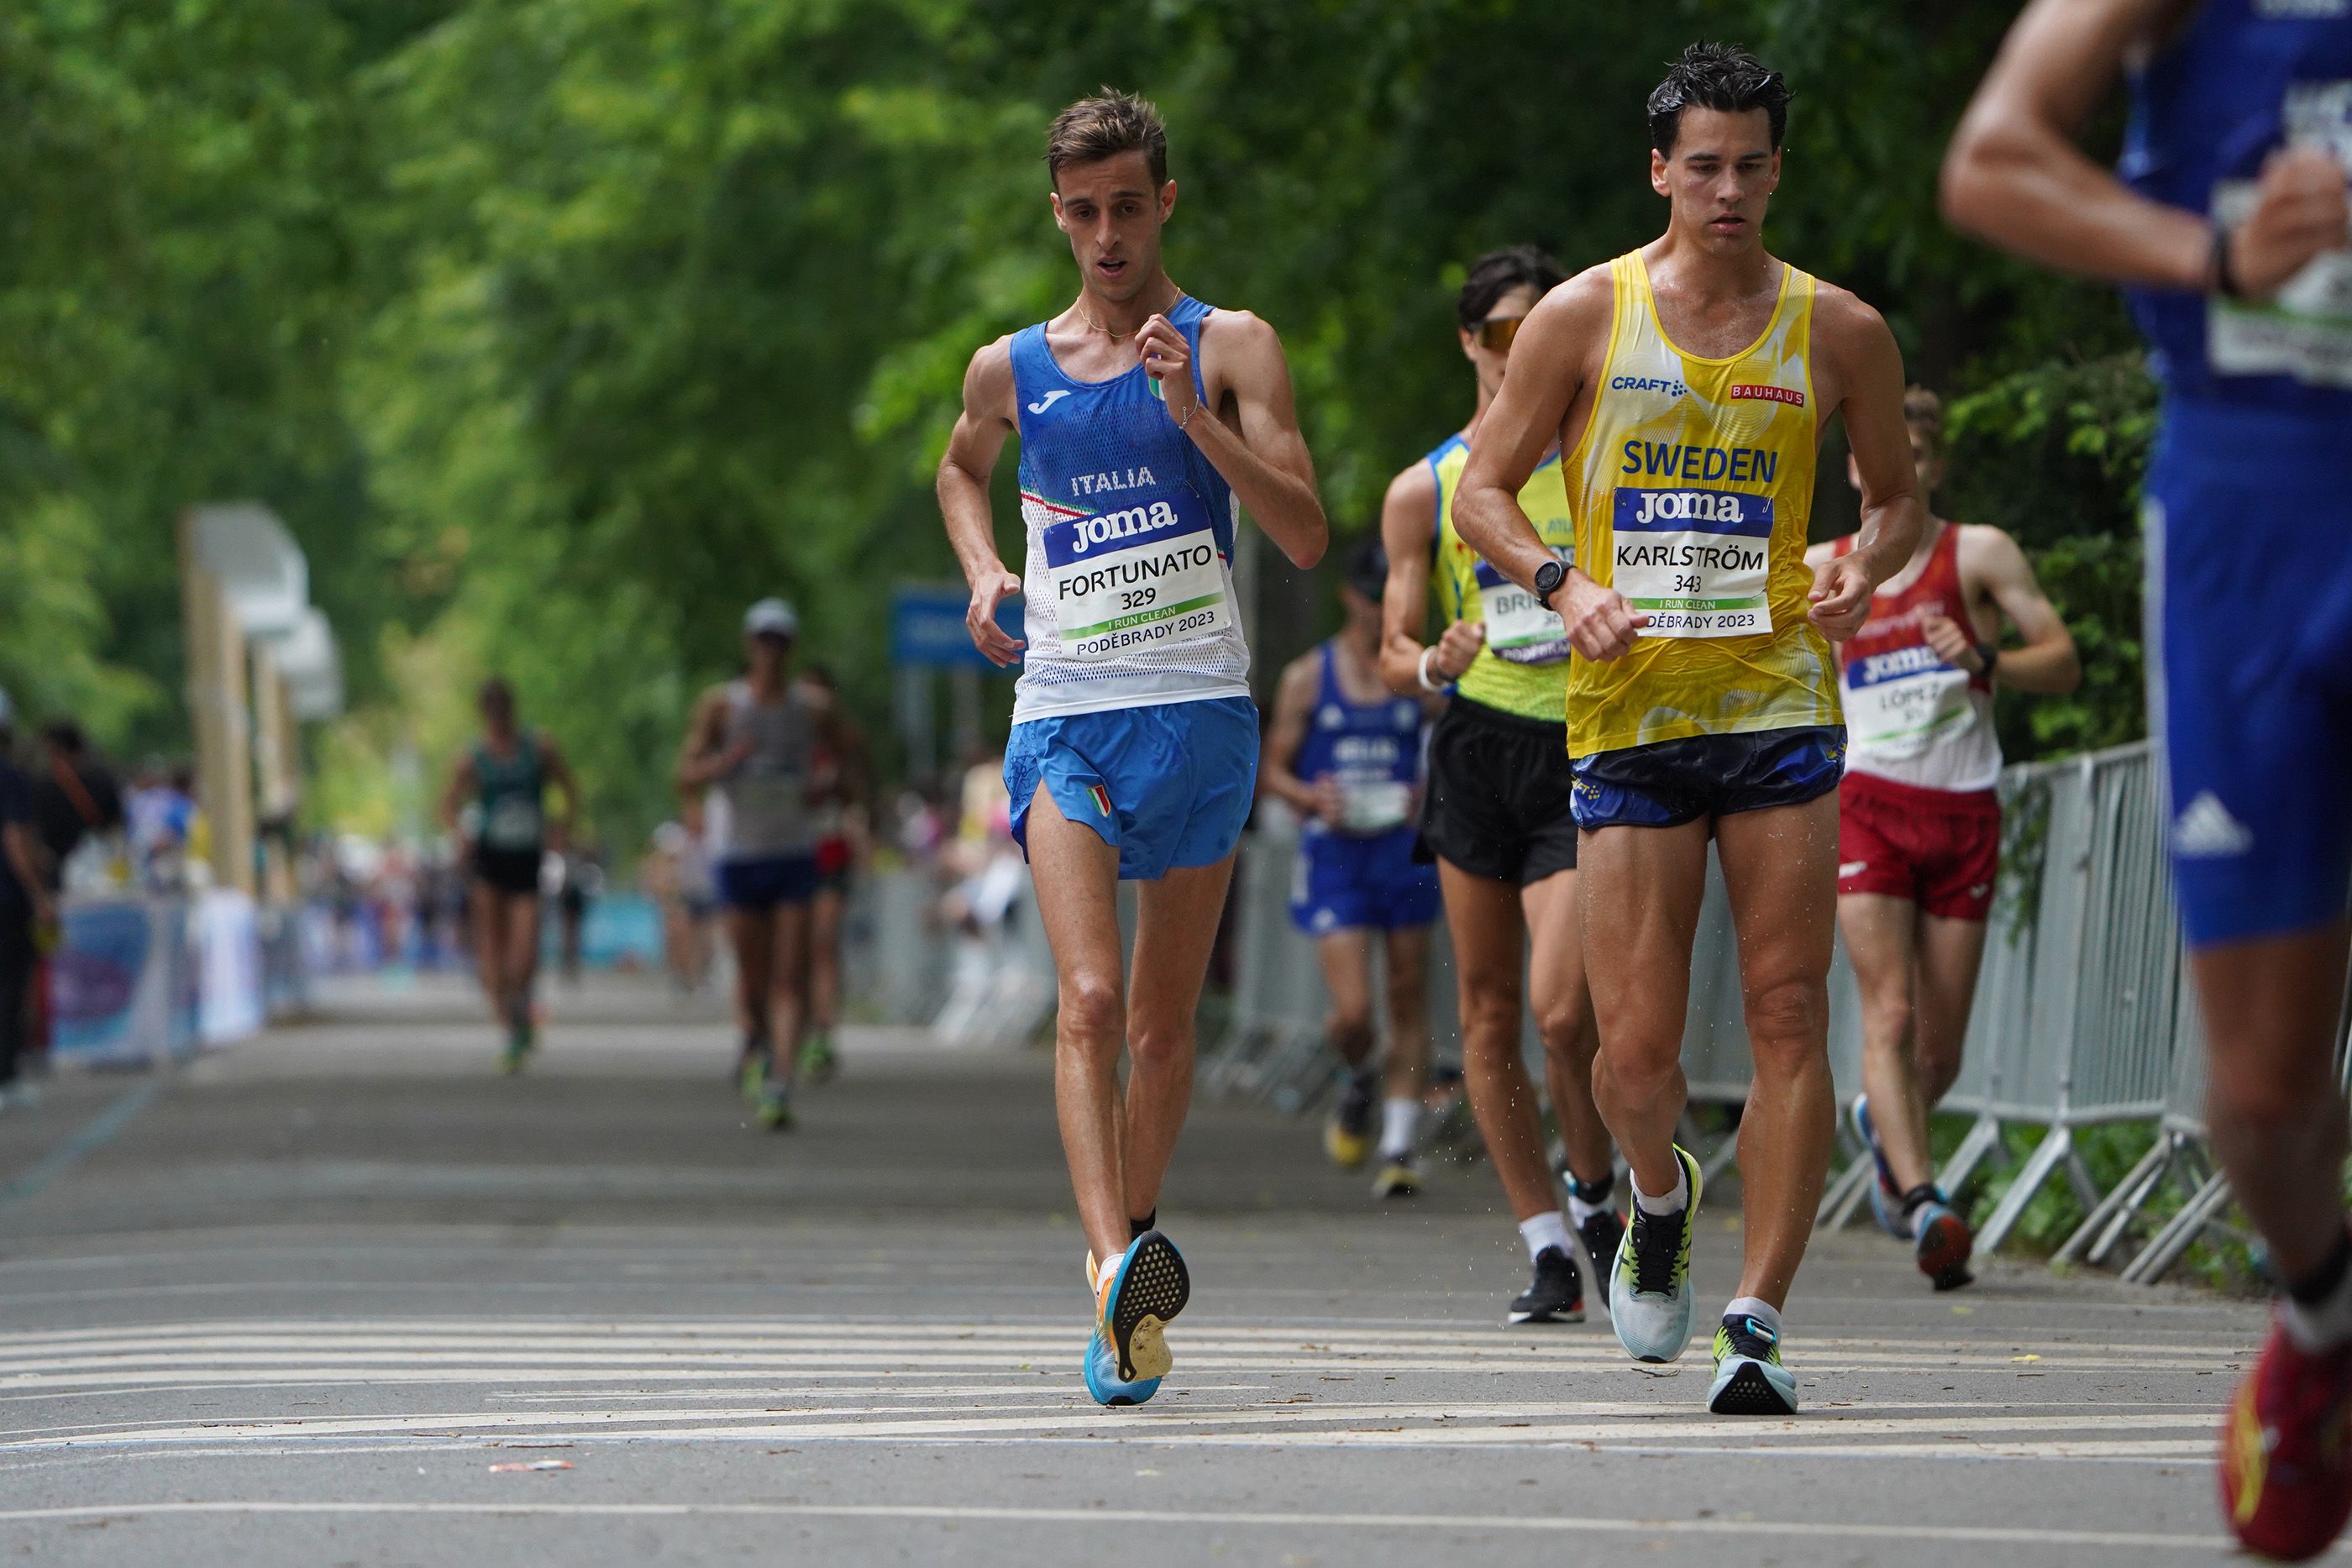 Francesco Fortunato and Perseus Karlstrom in 20km race walk action in Podebrady